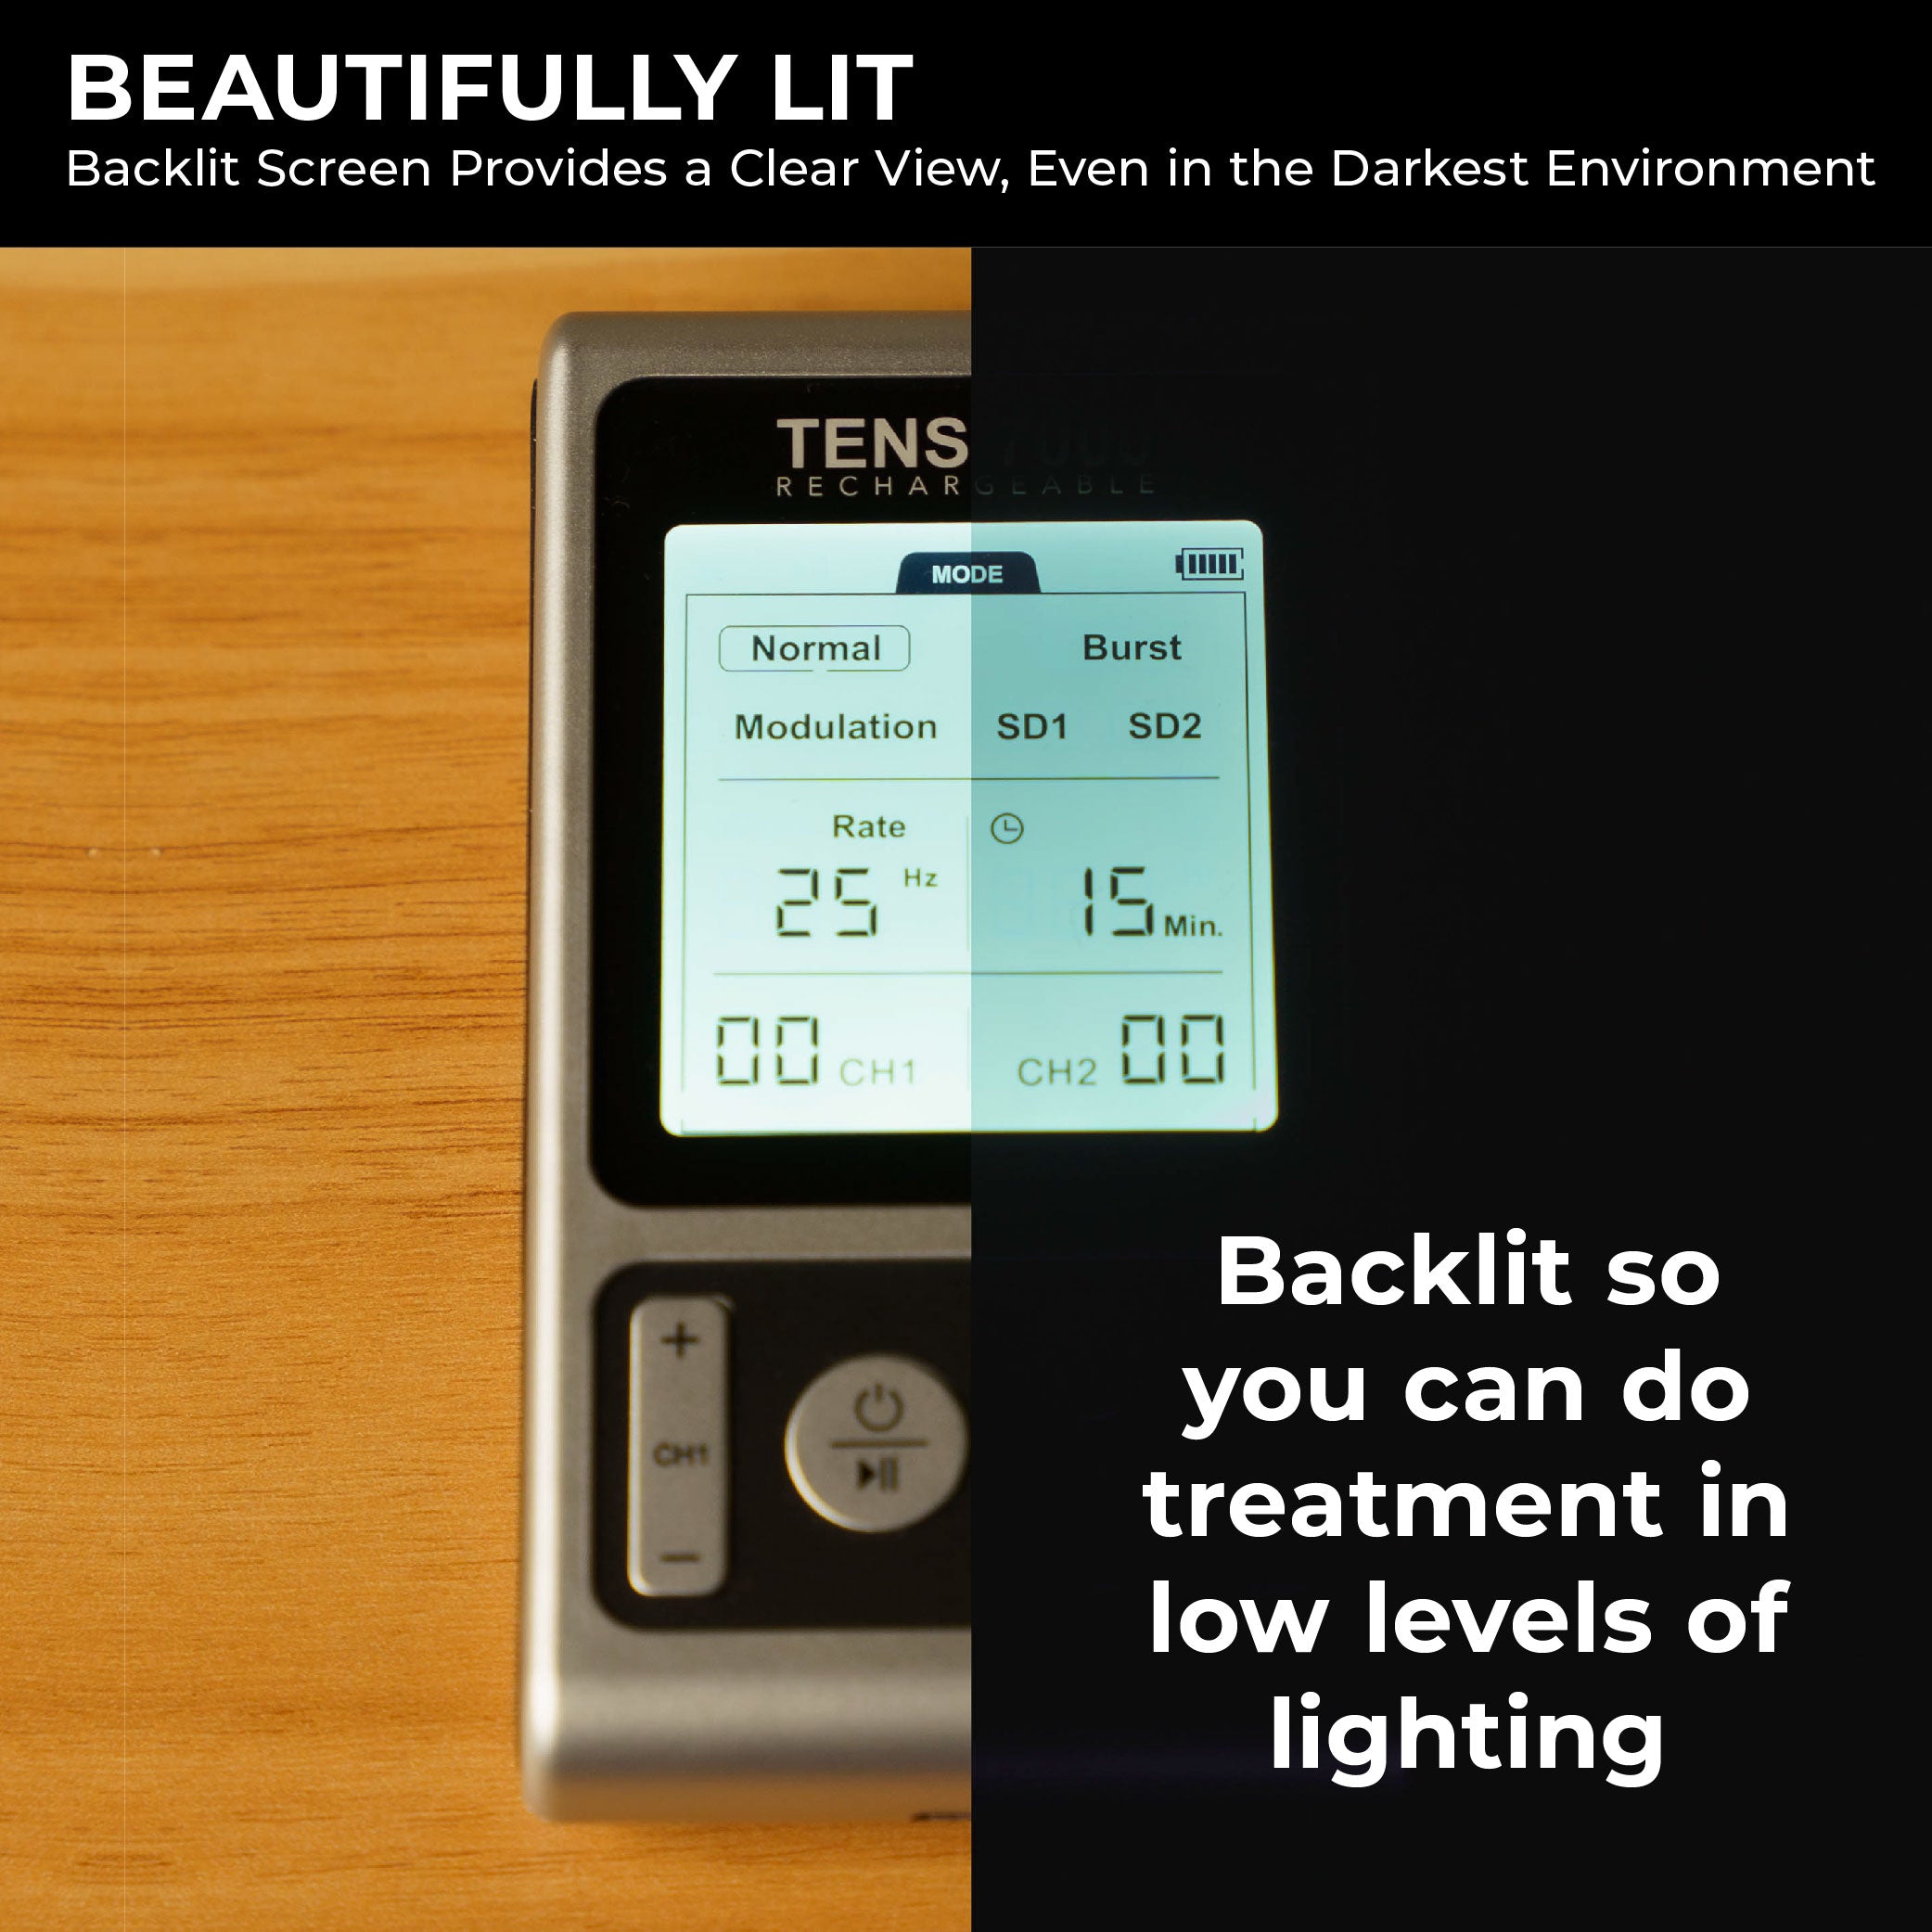 TENS 7000 Rechargeable TENS Unit Muscle Stimulator and Pain Relief Machine - Carex Health Brands